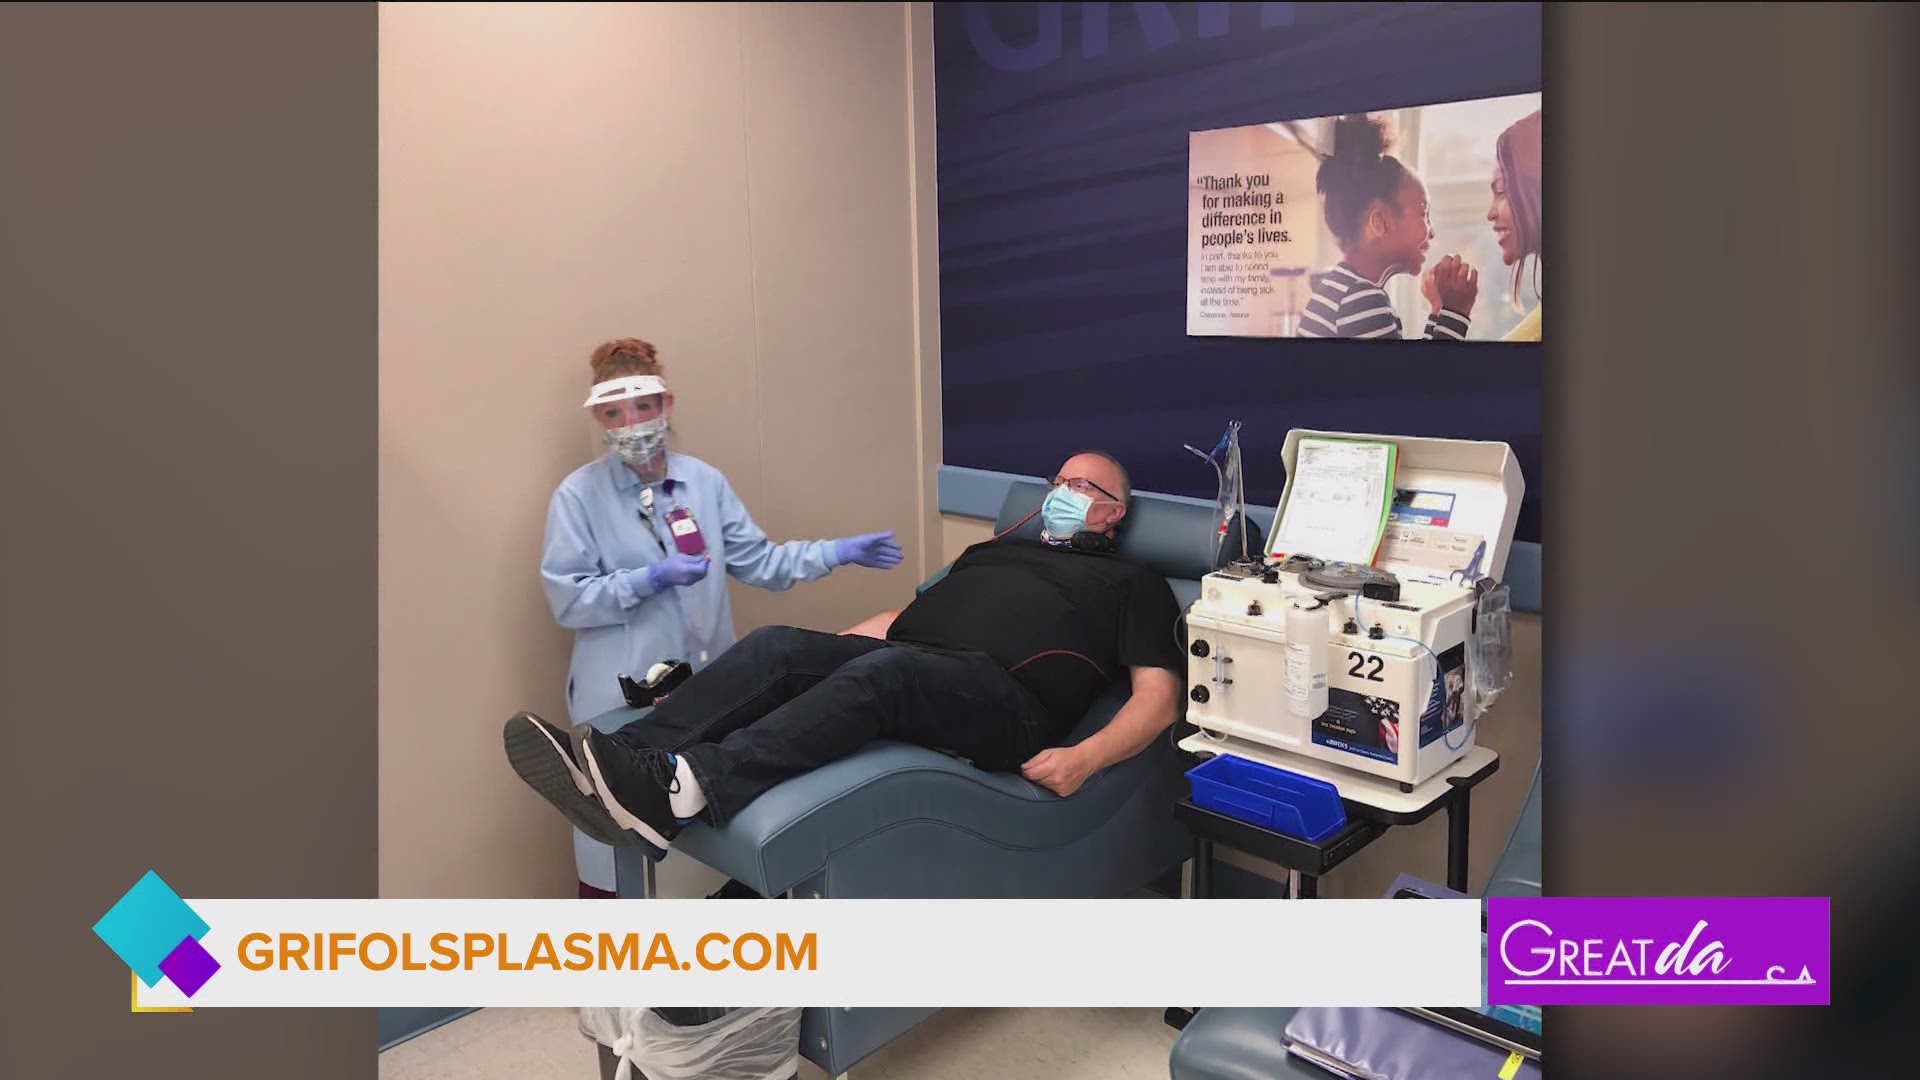 GRIFOLS creates lifesaving medicine by using plasma. They're reminding people who are able, to donate their plasma in order to help save lives.